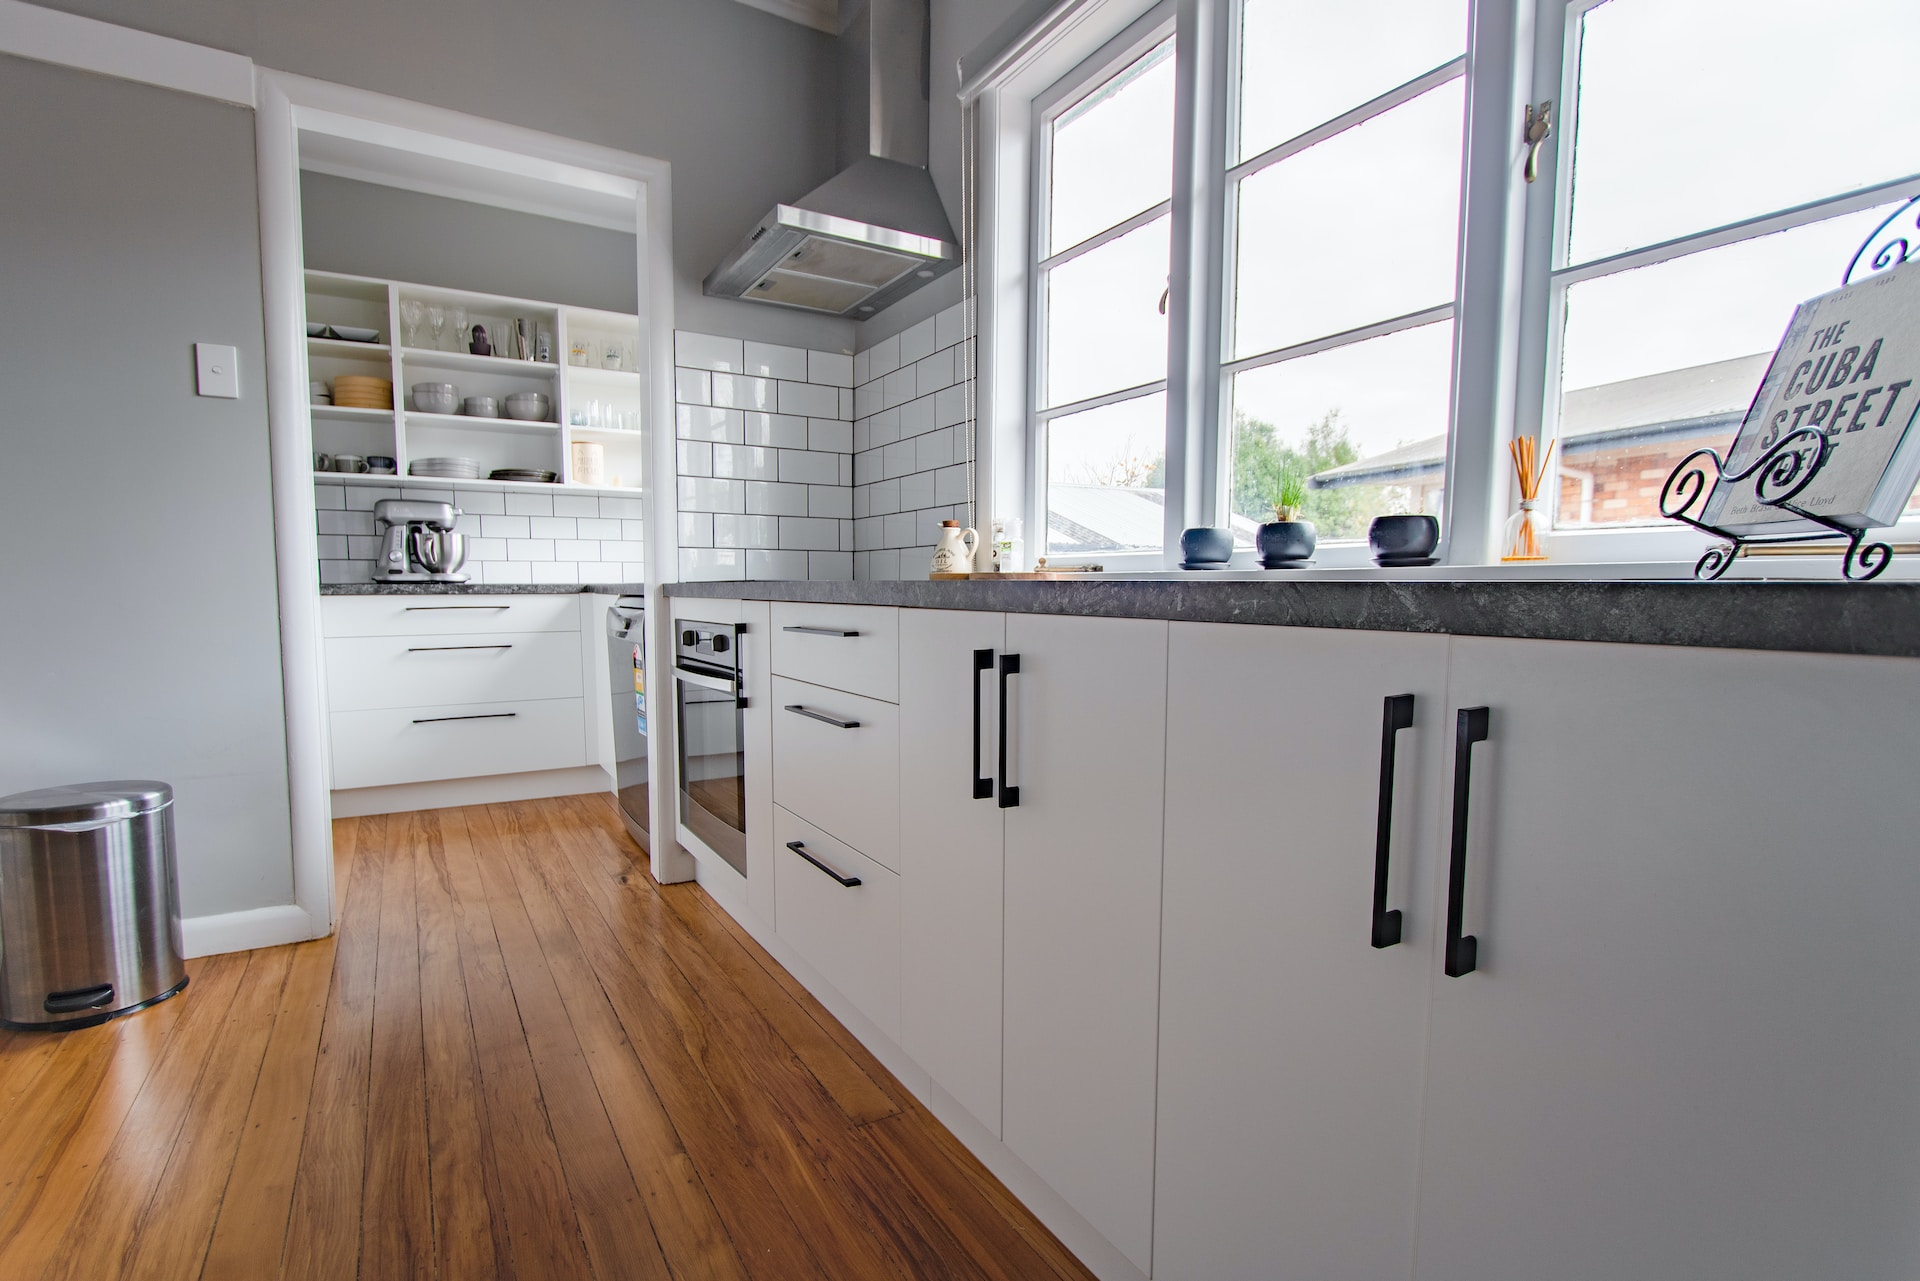 How to Choose the Right Flooring for Your Kitchen